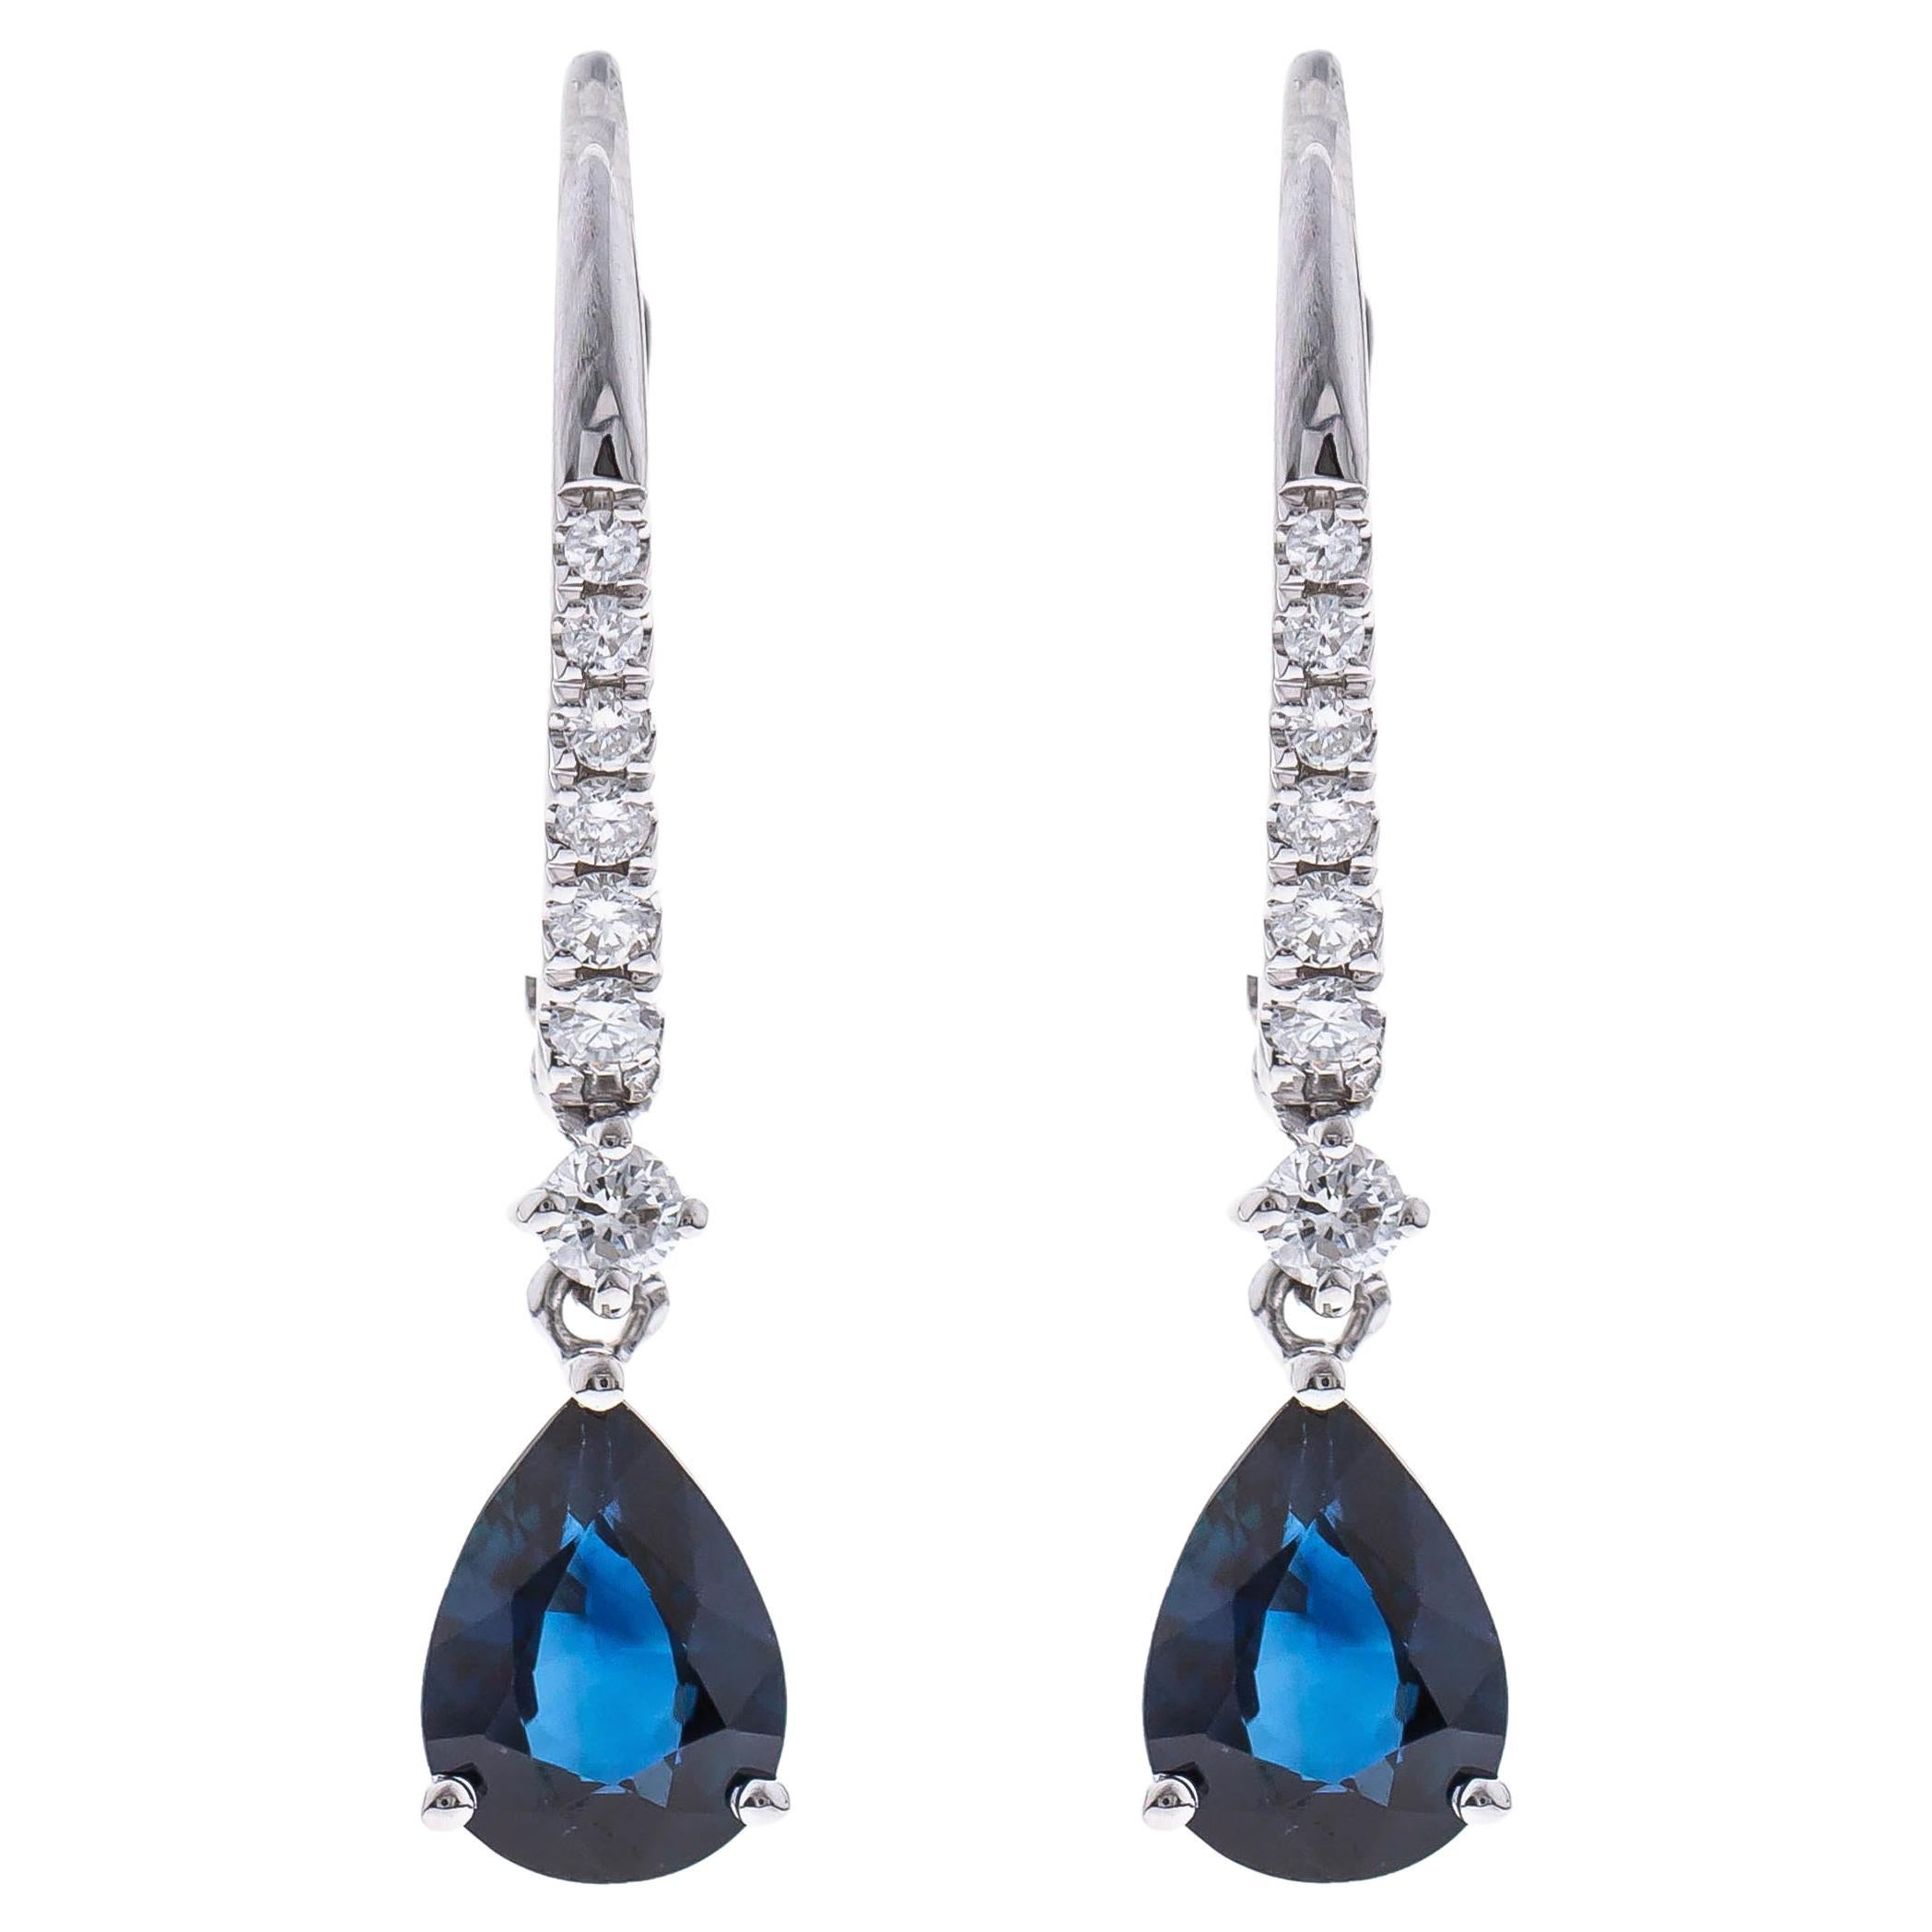 1.49 carat Pear-cut Blue Sapphire With Diamond accents 14K White Gold Earring.